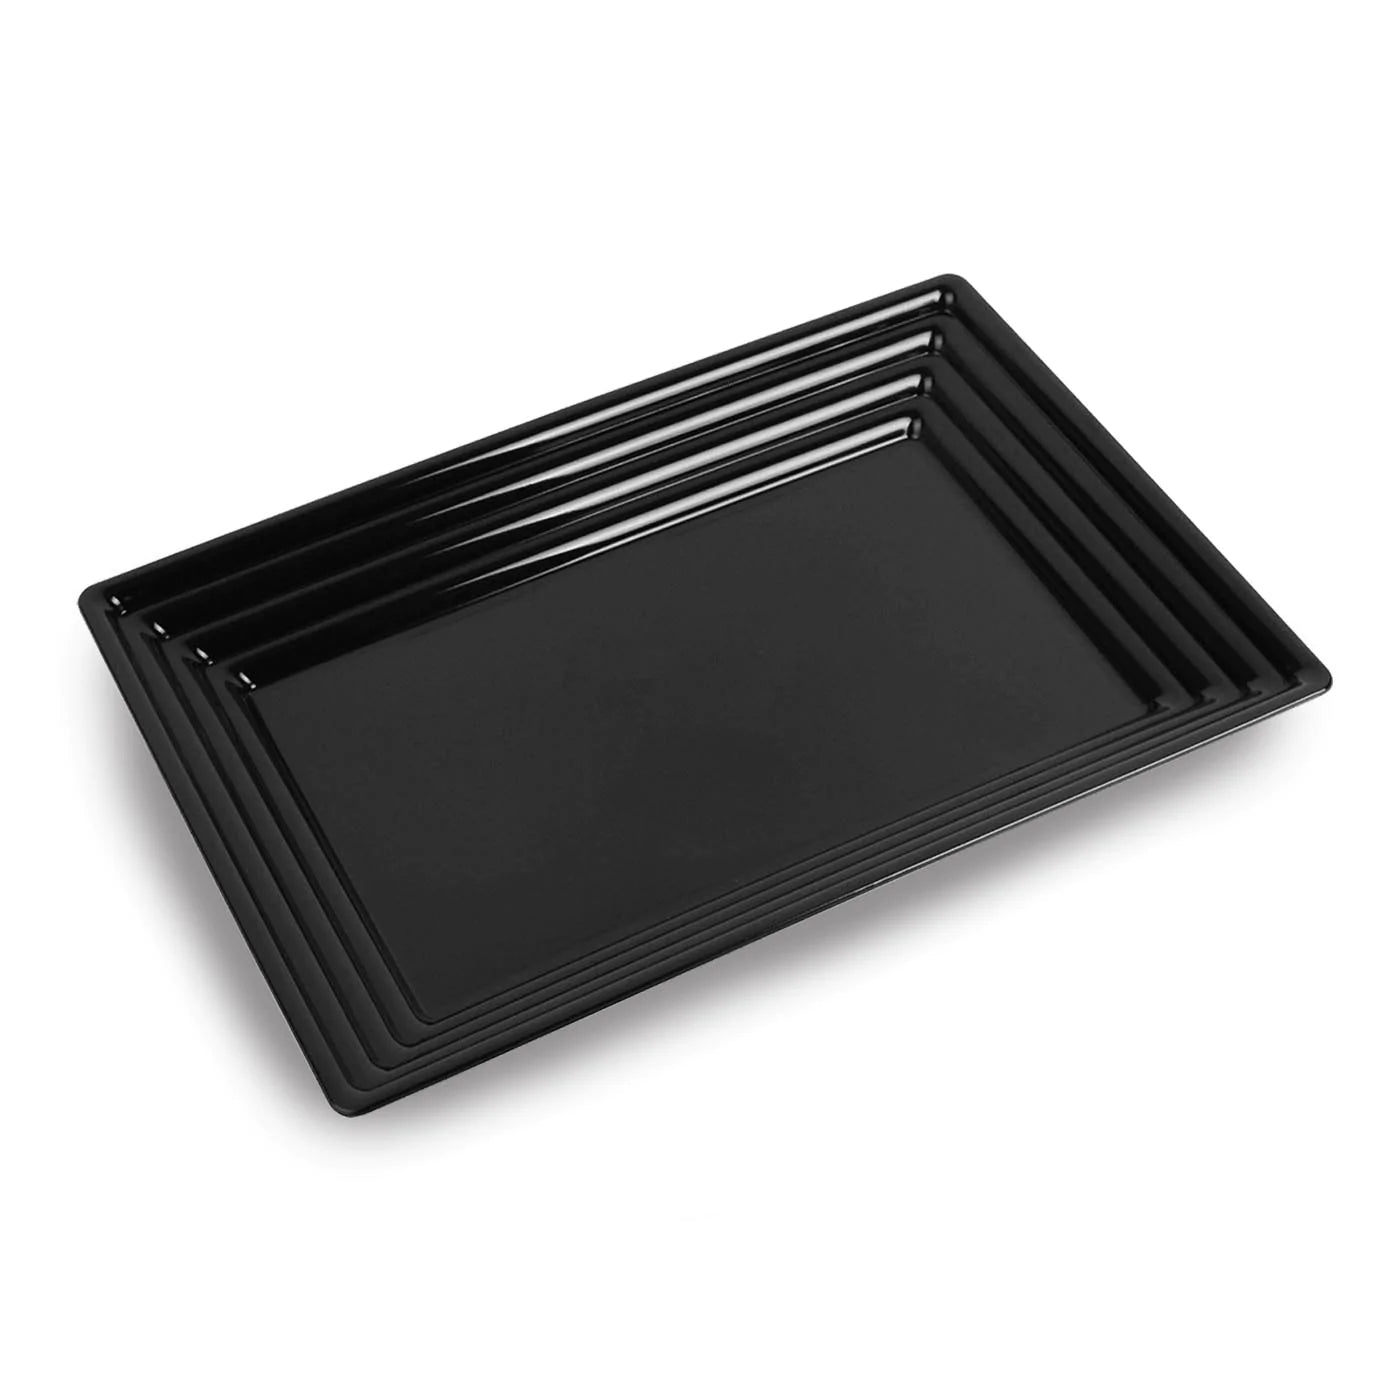 Plastic Trays - White Groove Rim Serving Tray